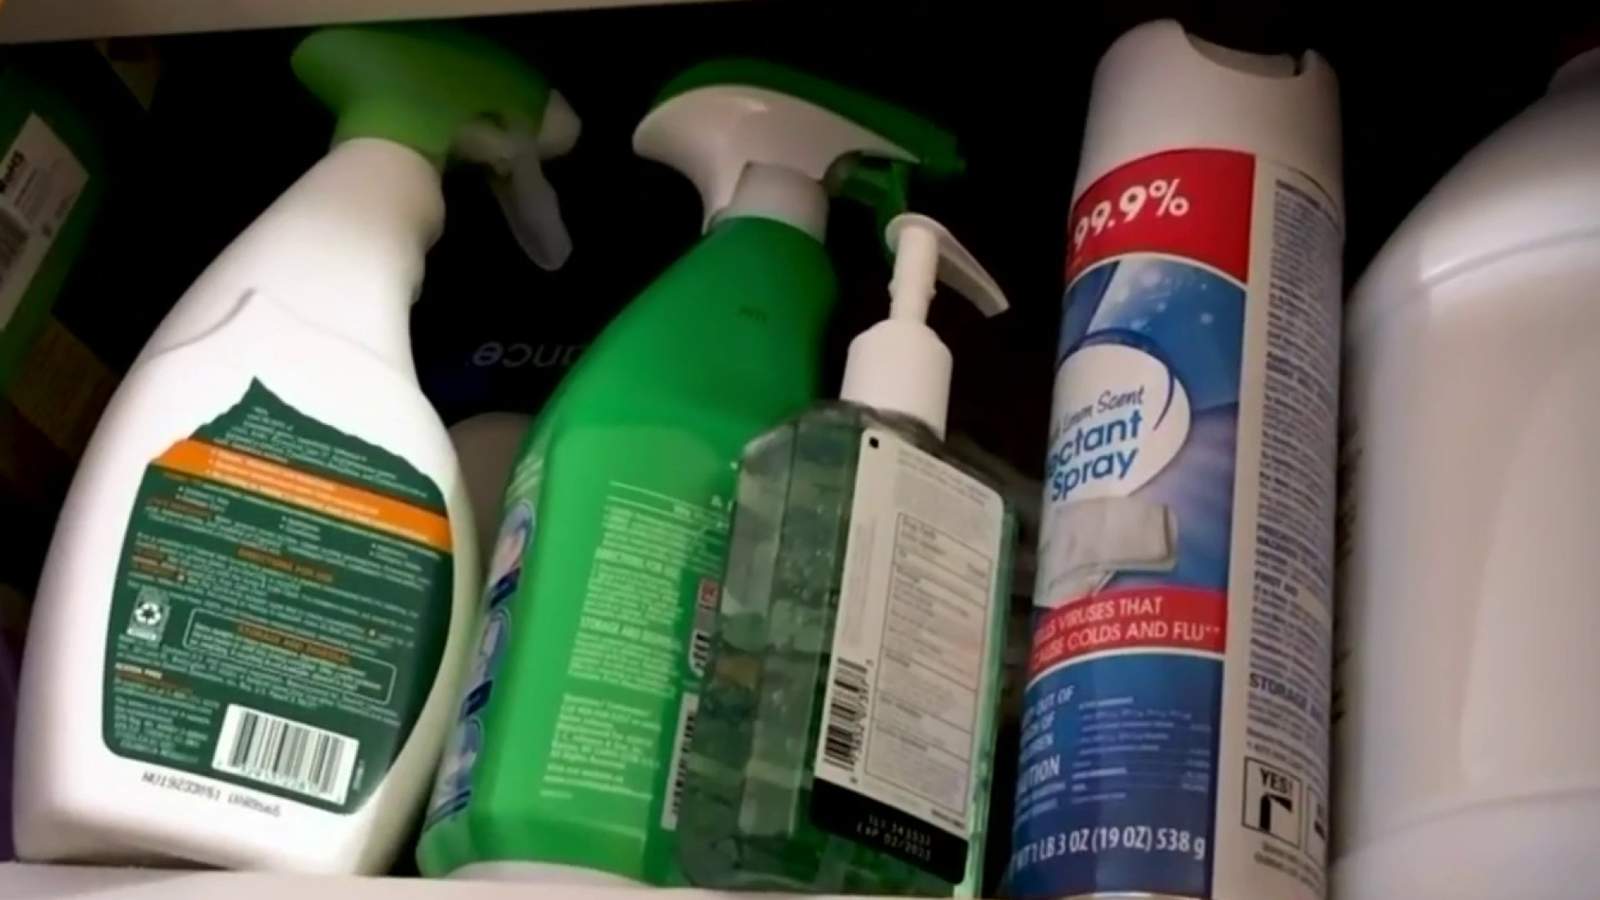 Cleaning supplies used in your home could pose hidden dangers